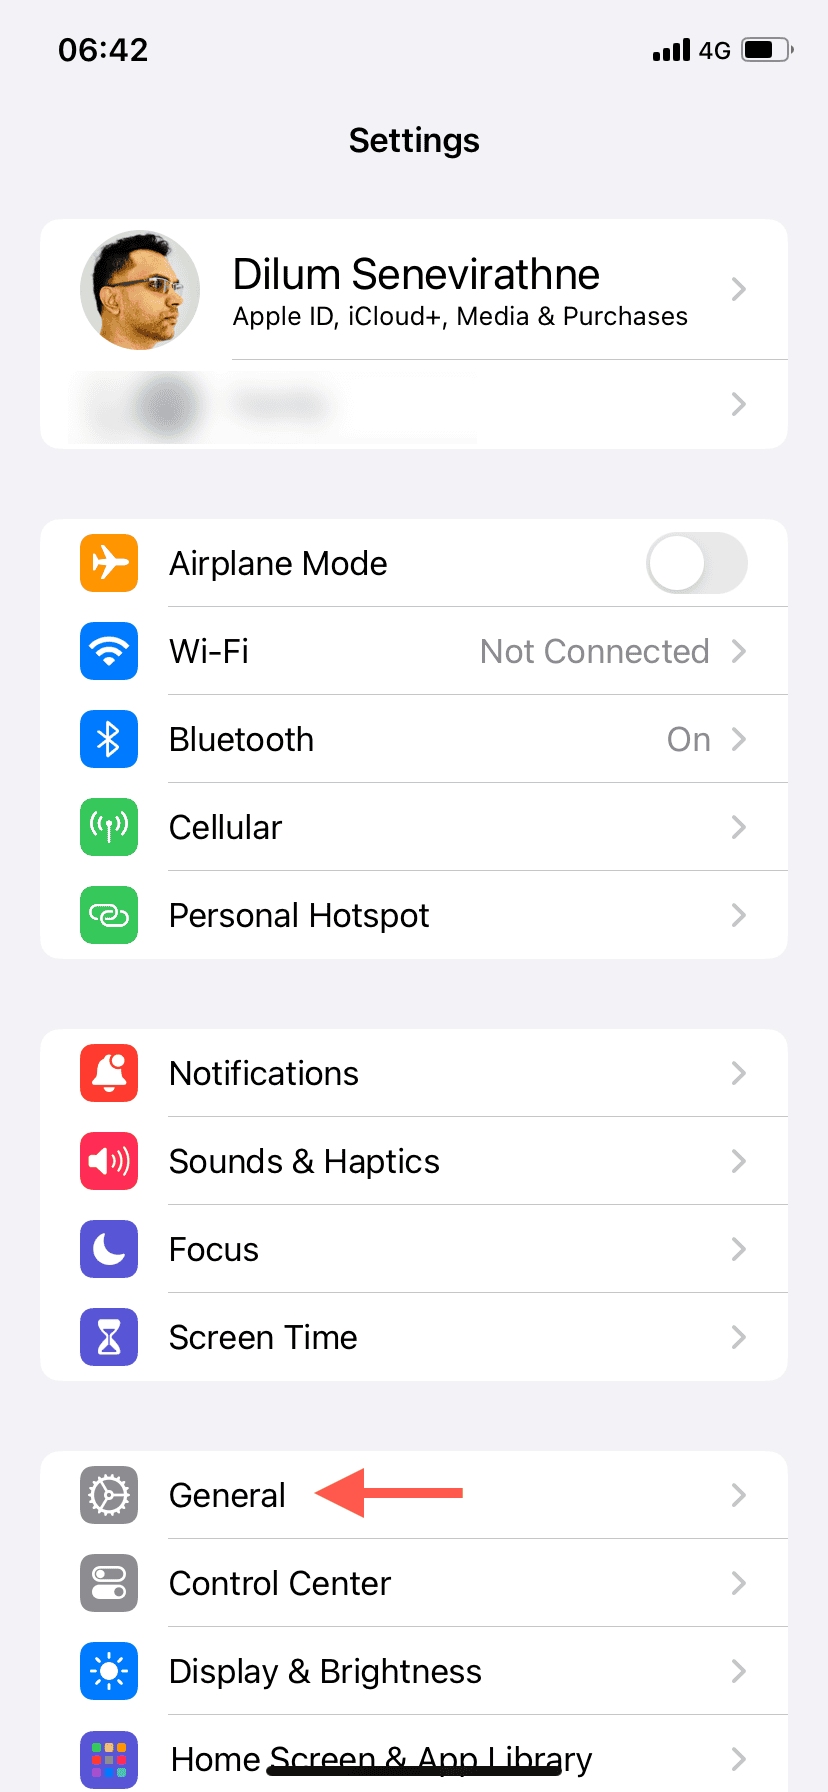 The General option highlighted in iPhone Settings.